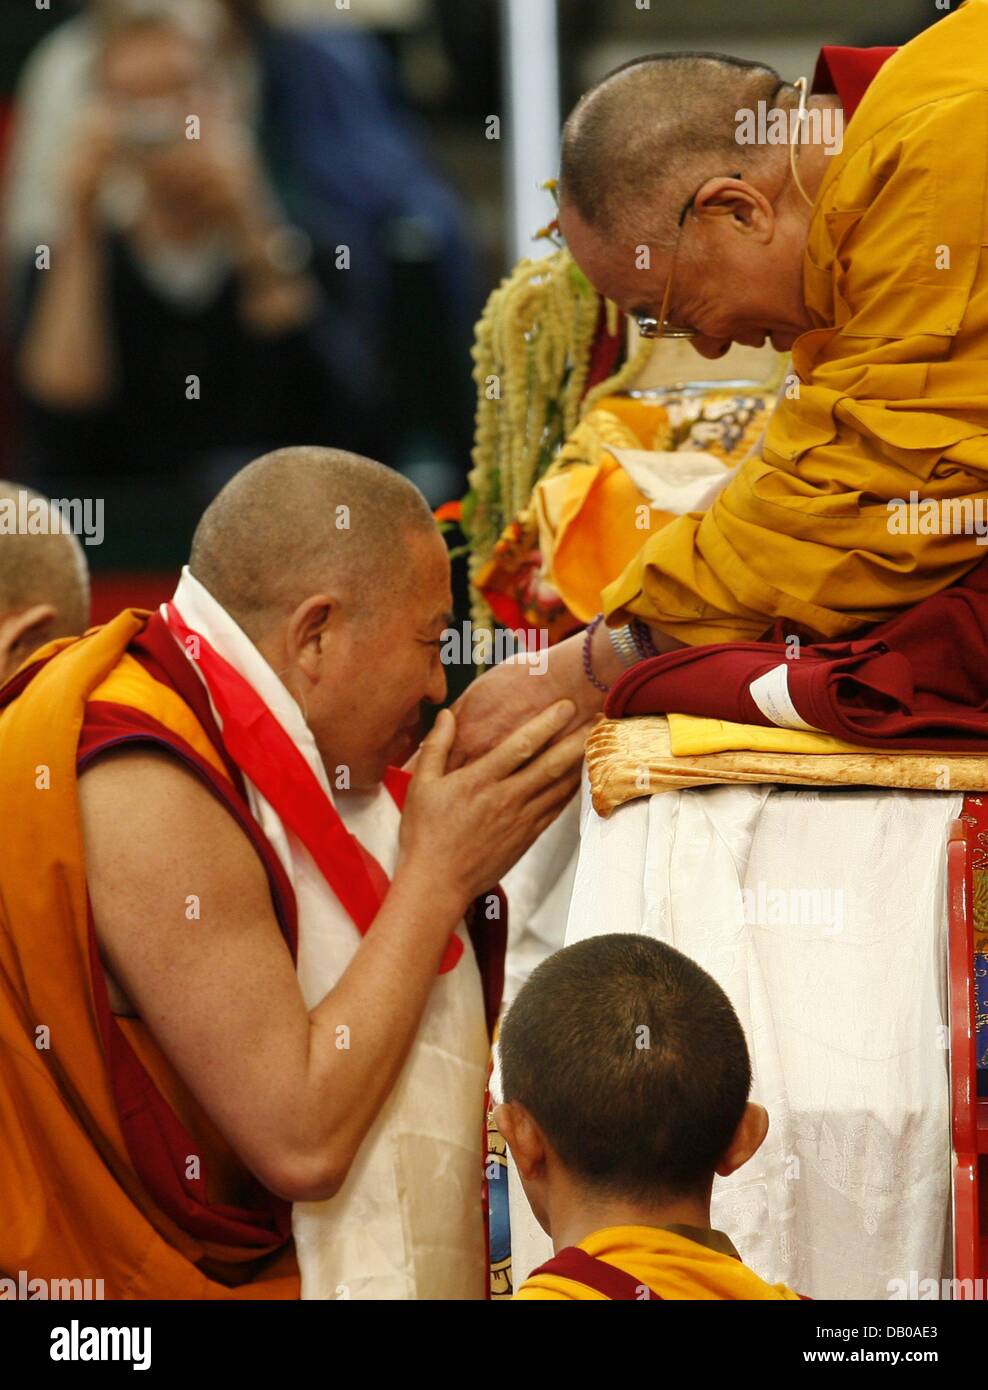 A monk gets in touch with the Dalai Lama (R) on his throne in Hamburg, Germany, 27 July 2007. The 72-year-old Nobel Peace Prize Laureate ended his ten-day visit to Hamburg with a blessing and continues to Freiburg, Germany on 28 July to lecture on the theme Economy and Spirituality. Photo: Sebastian Widmann Stock Photo